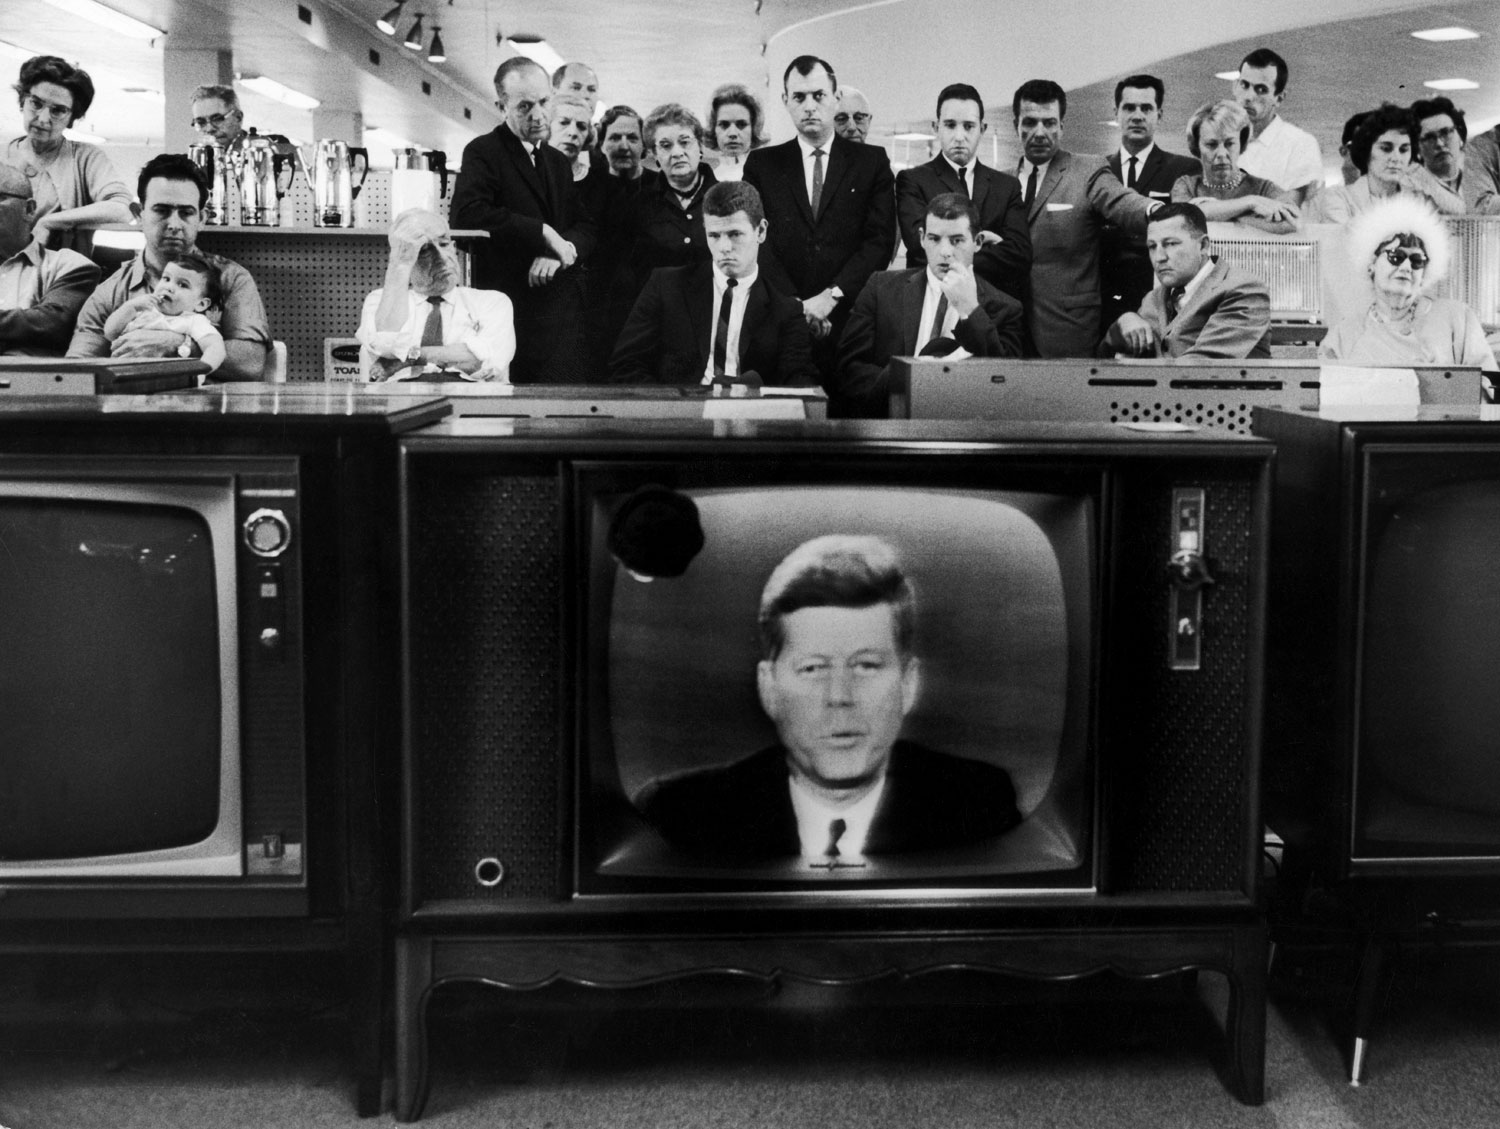 People in a department store watch as President John Kennedy announces a blockade of Cuba during the Cuban Missile Crisis, 1962.